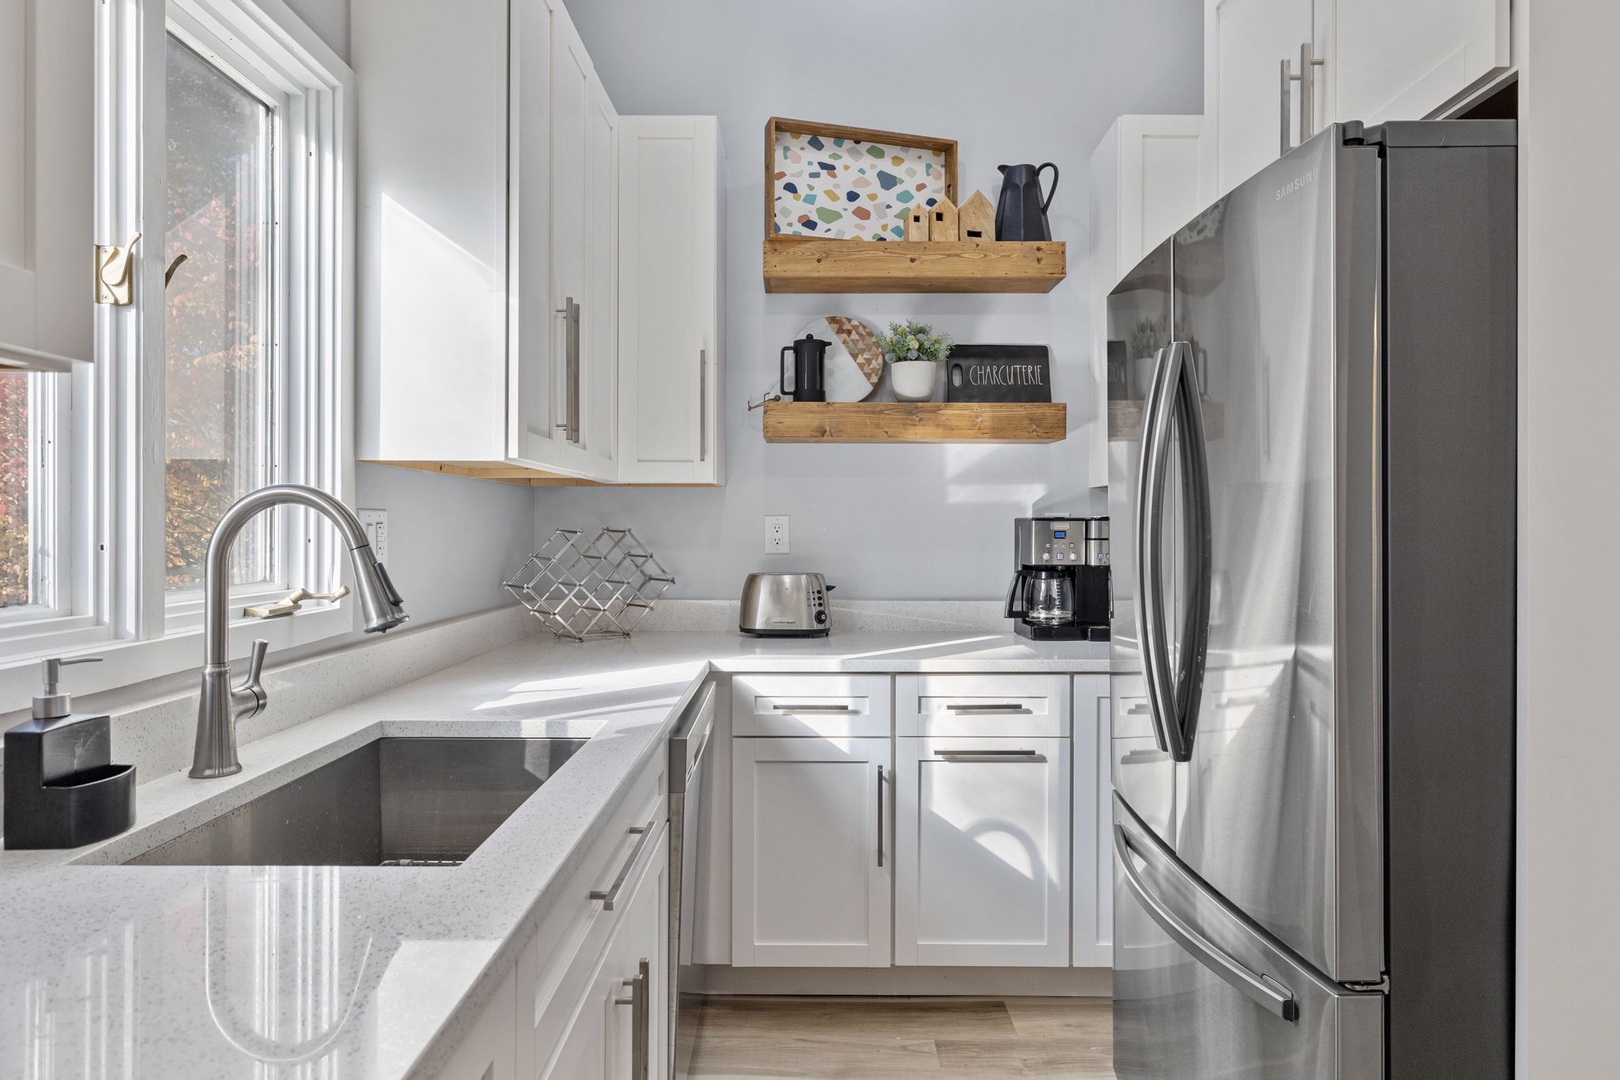 Stone countertops, high-quality appliances and all your cooking essentials.